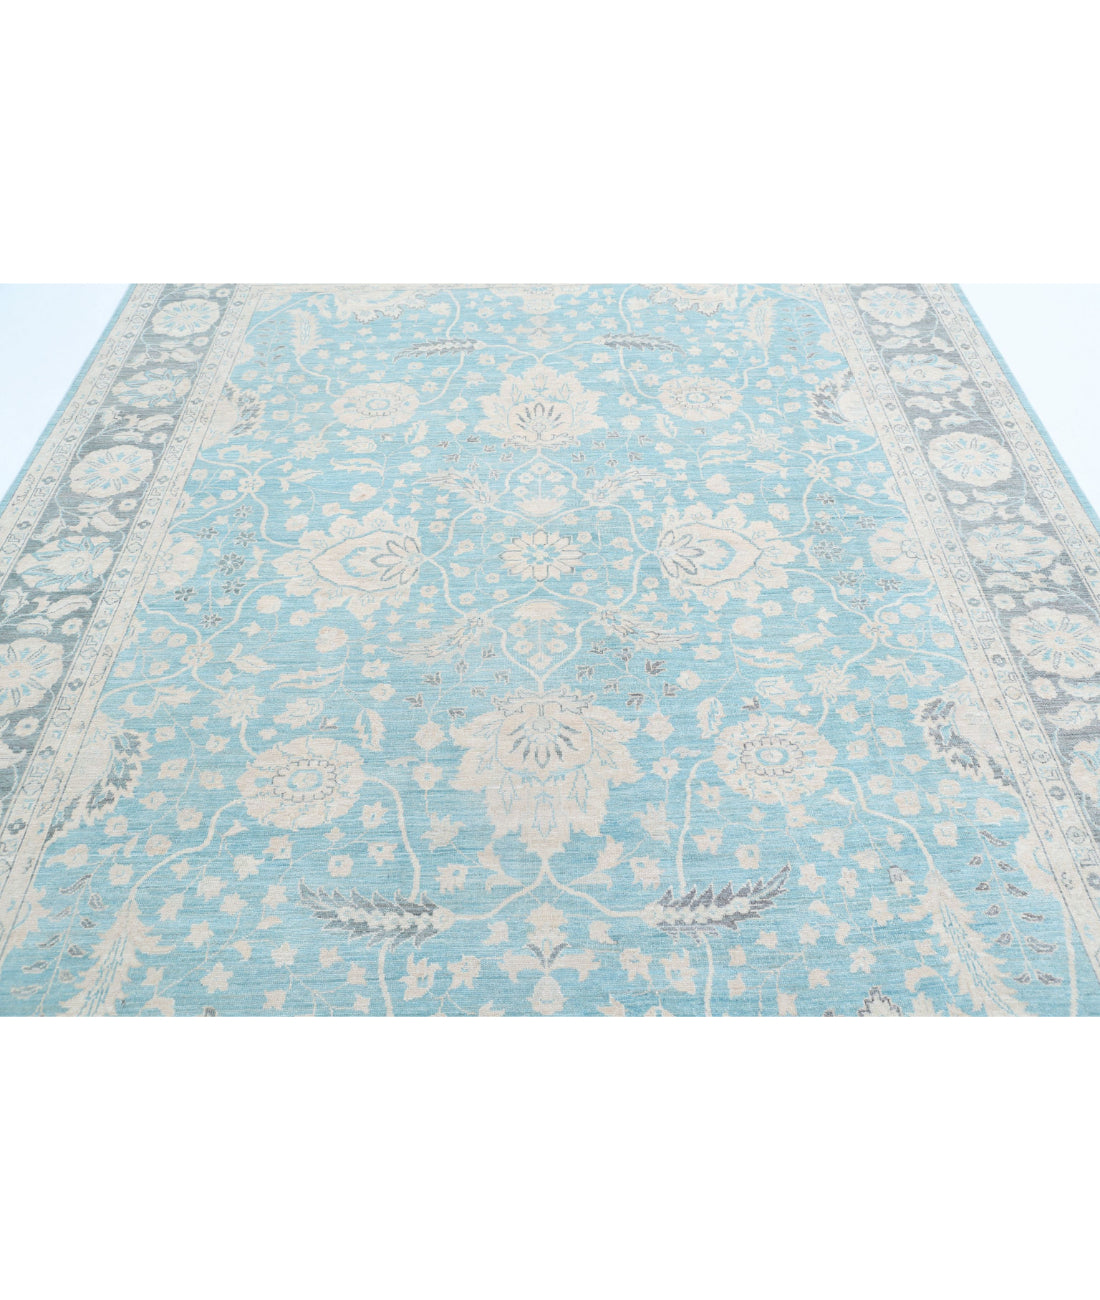 Hand Knotted Serenity Wool Rug - 7'11'' x 9'7'' 7'11'' x 9'7'' (238 X 288) / Blue / Grey